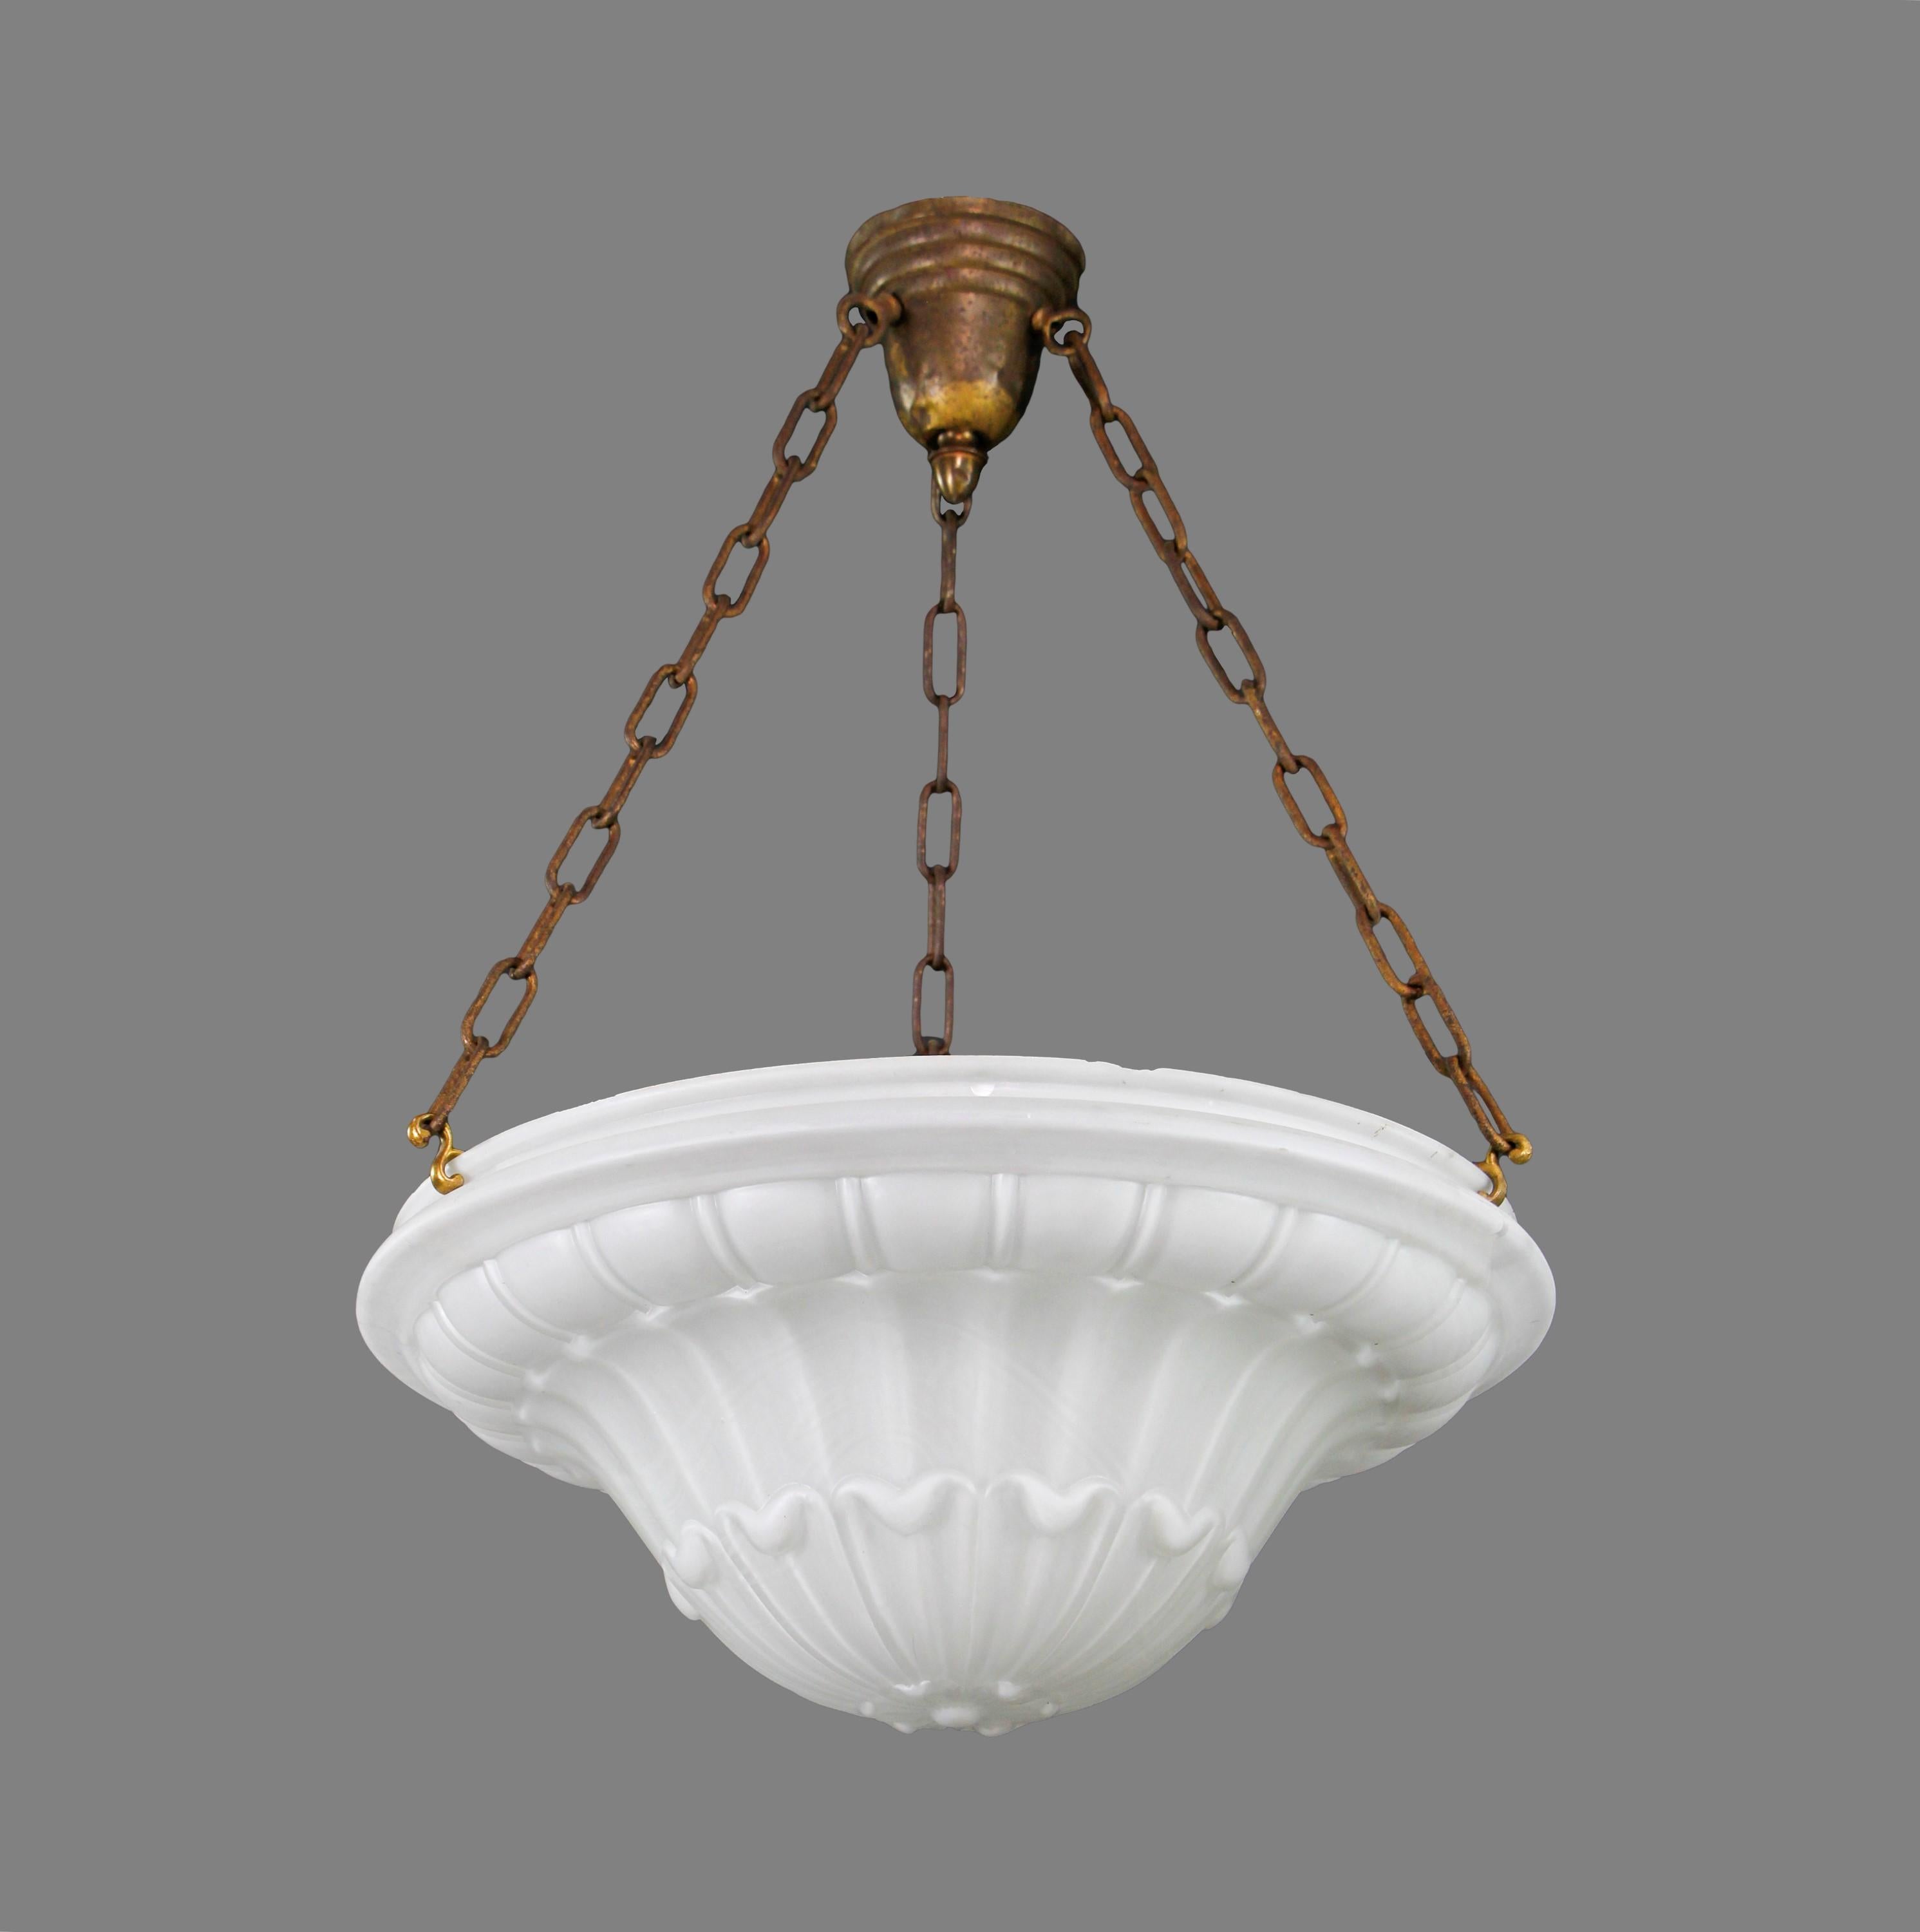 Early 20th century pendant light. Features a white glass dish light shade with three steel chains and a brass canopy. Shade has some chips along the outside edges. Please see photos. Please note, this item is located in our Scranton, PA location.